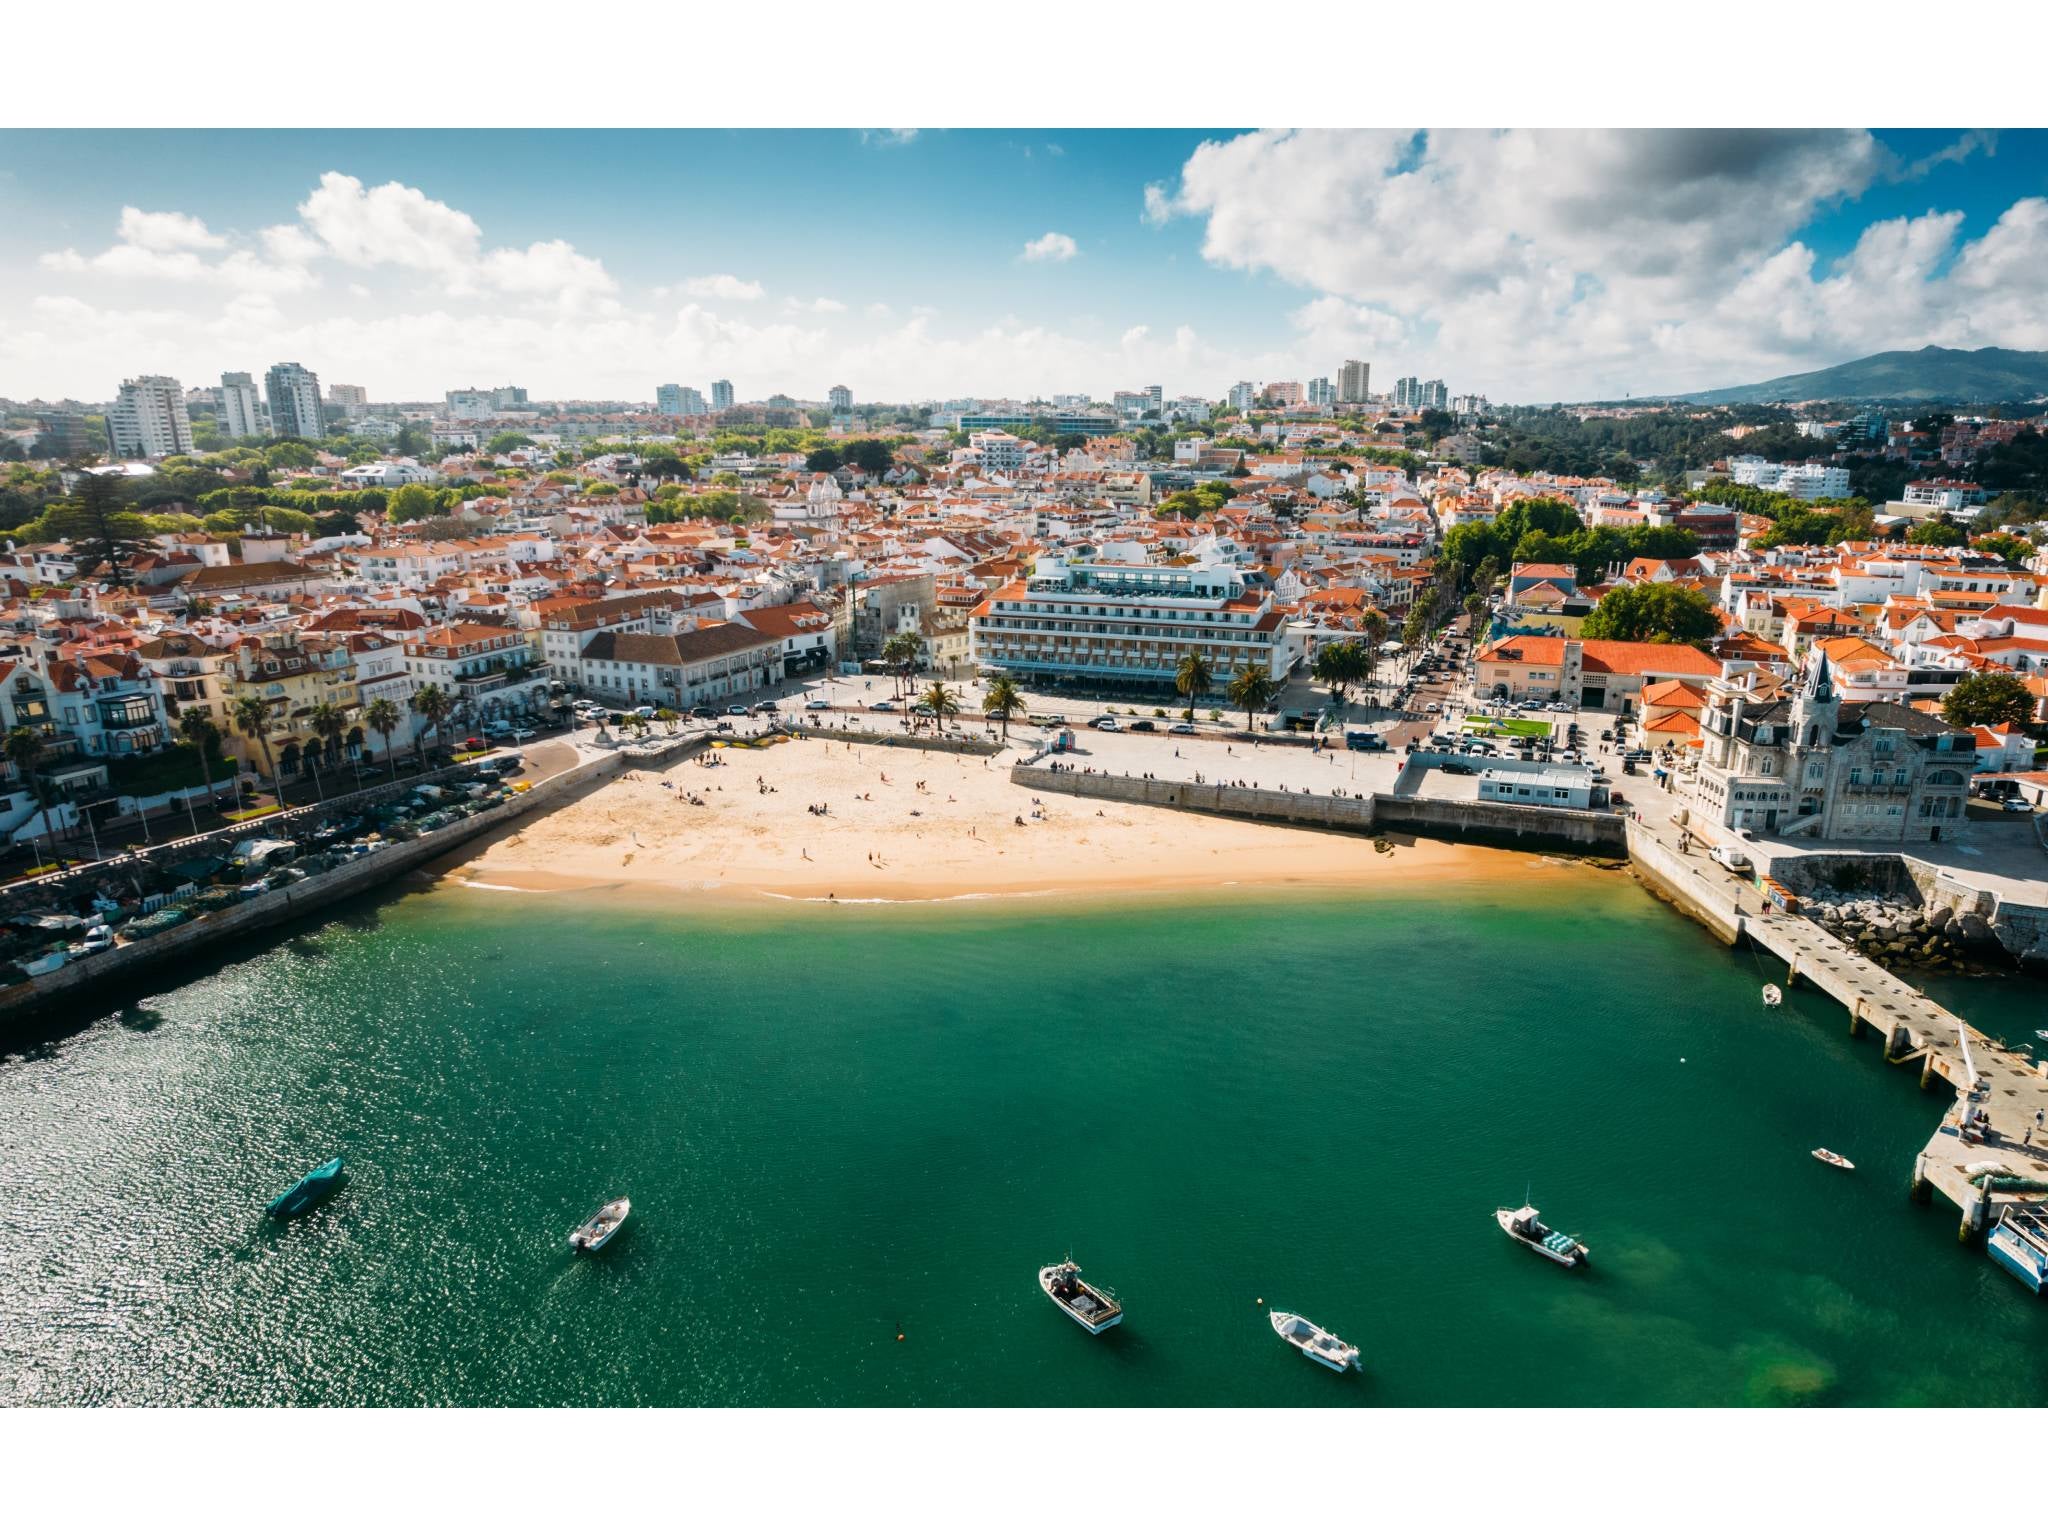 Places to stay include coastal locations like Cascais